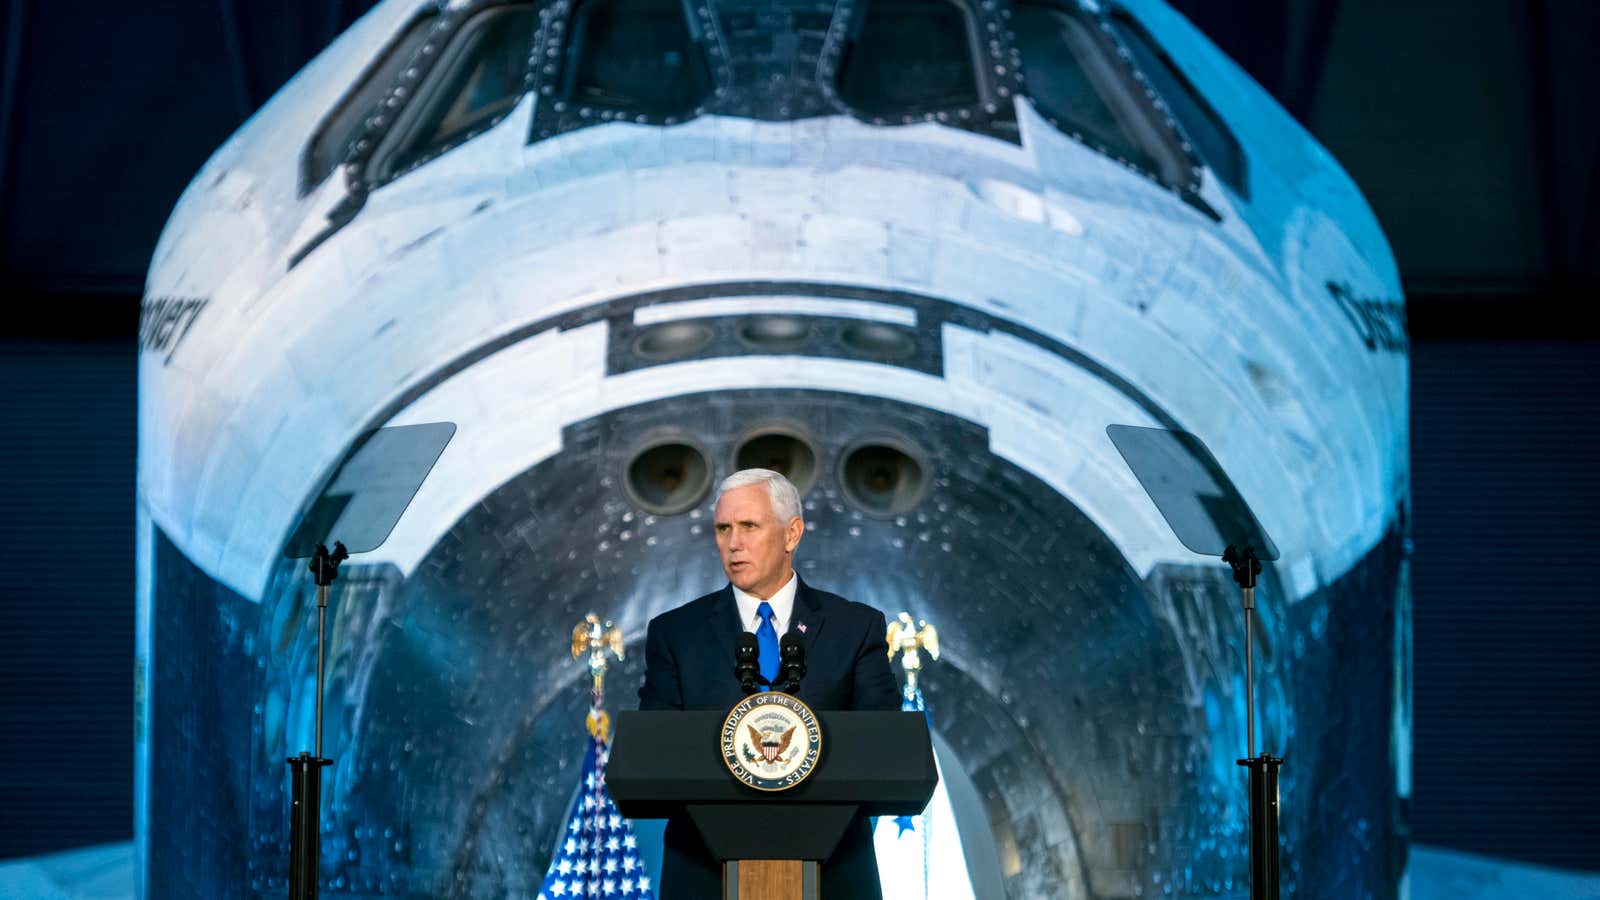 The vice president and an obsolete spacecraft.